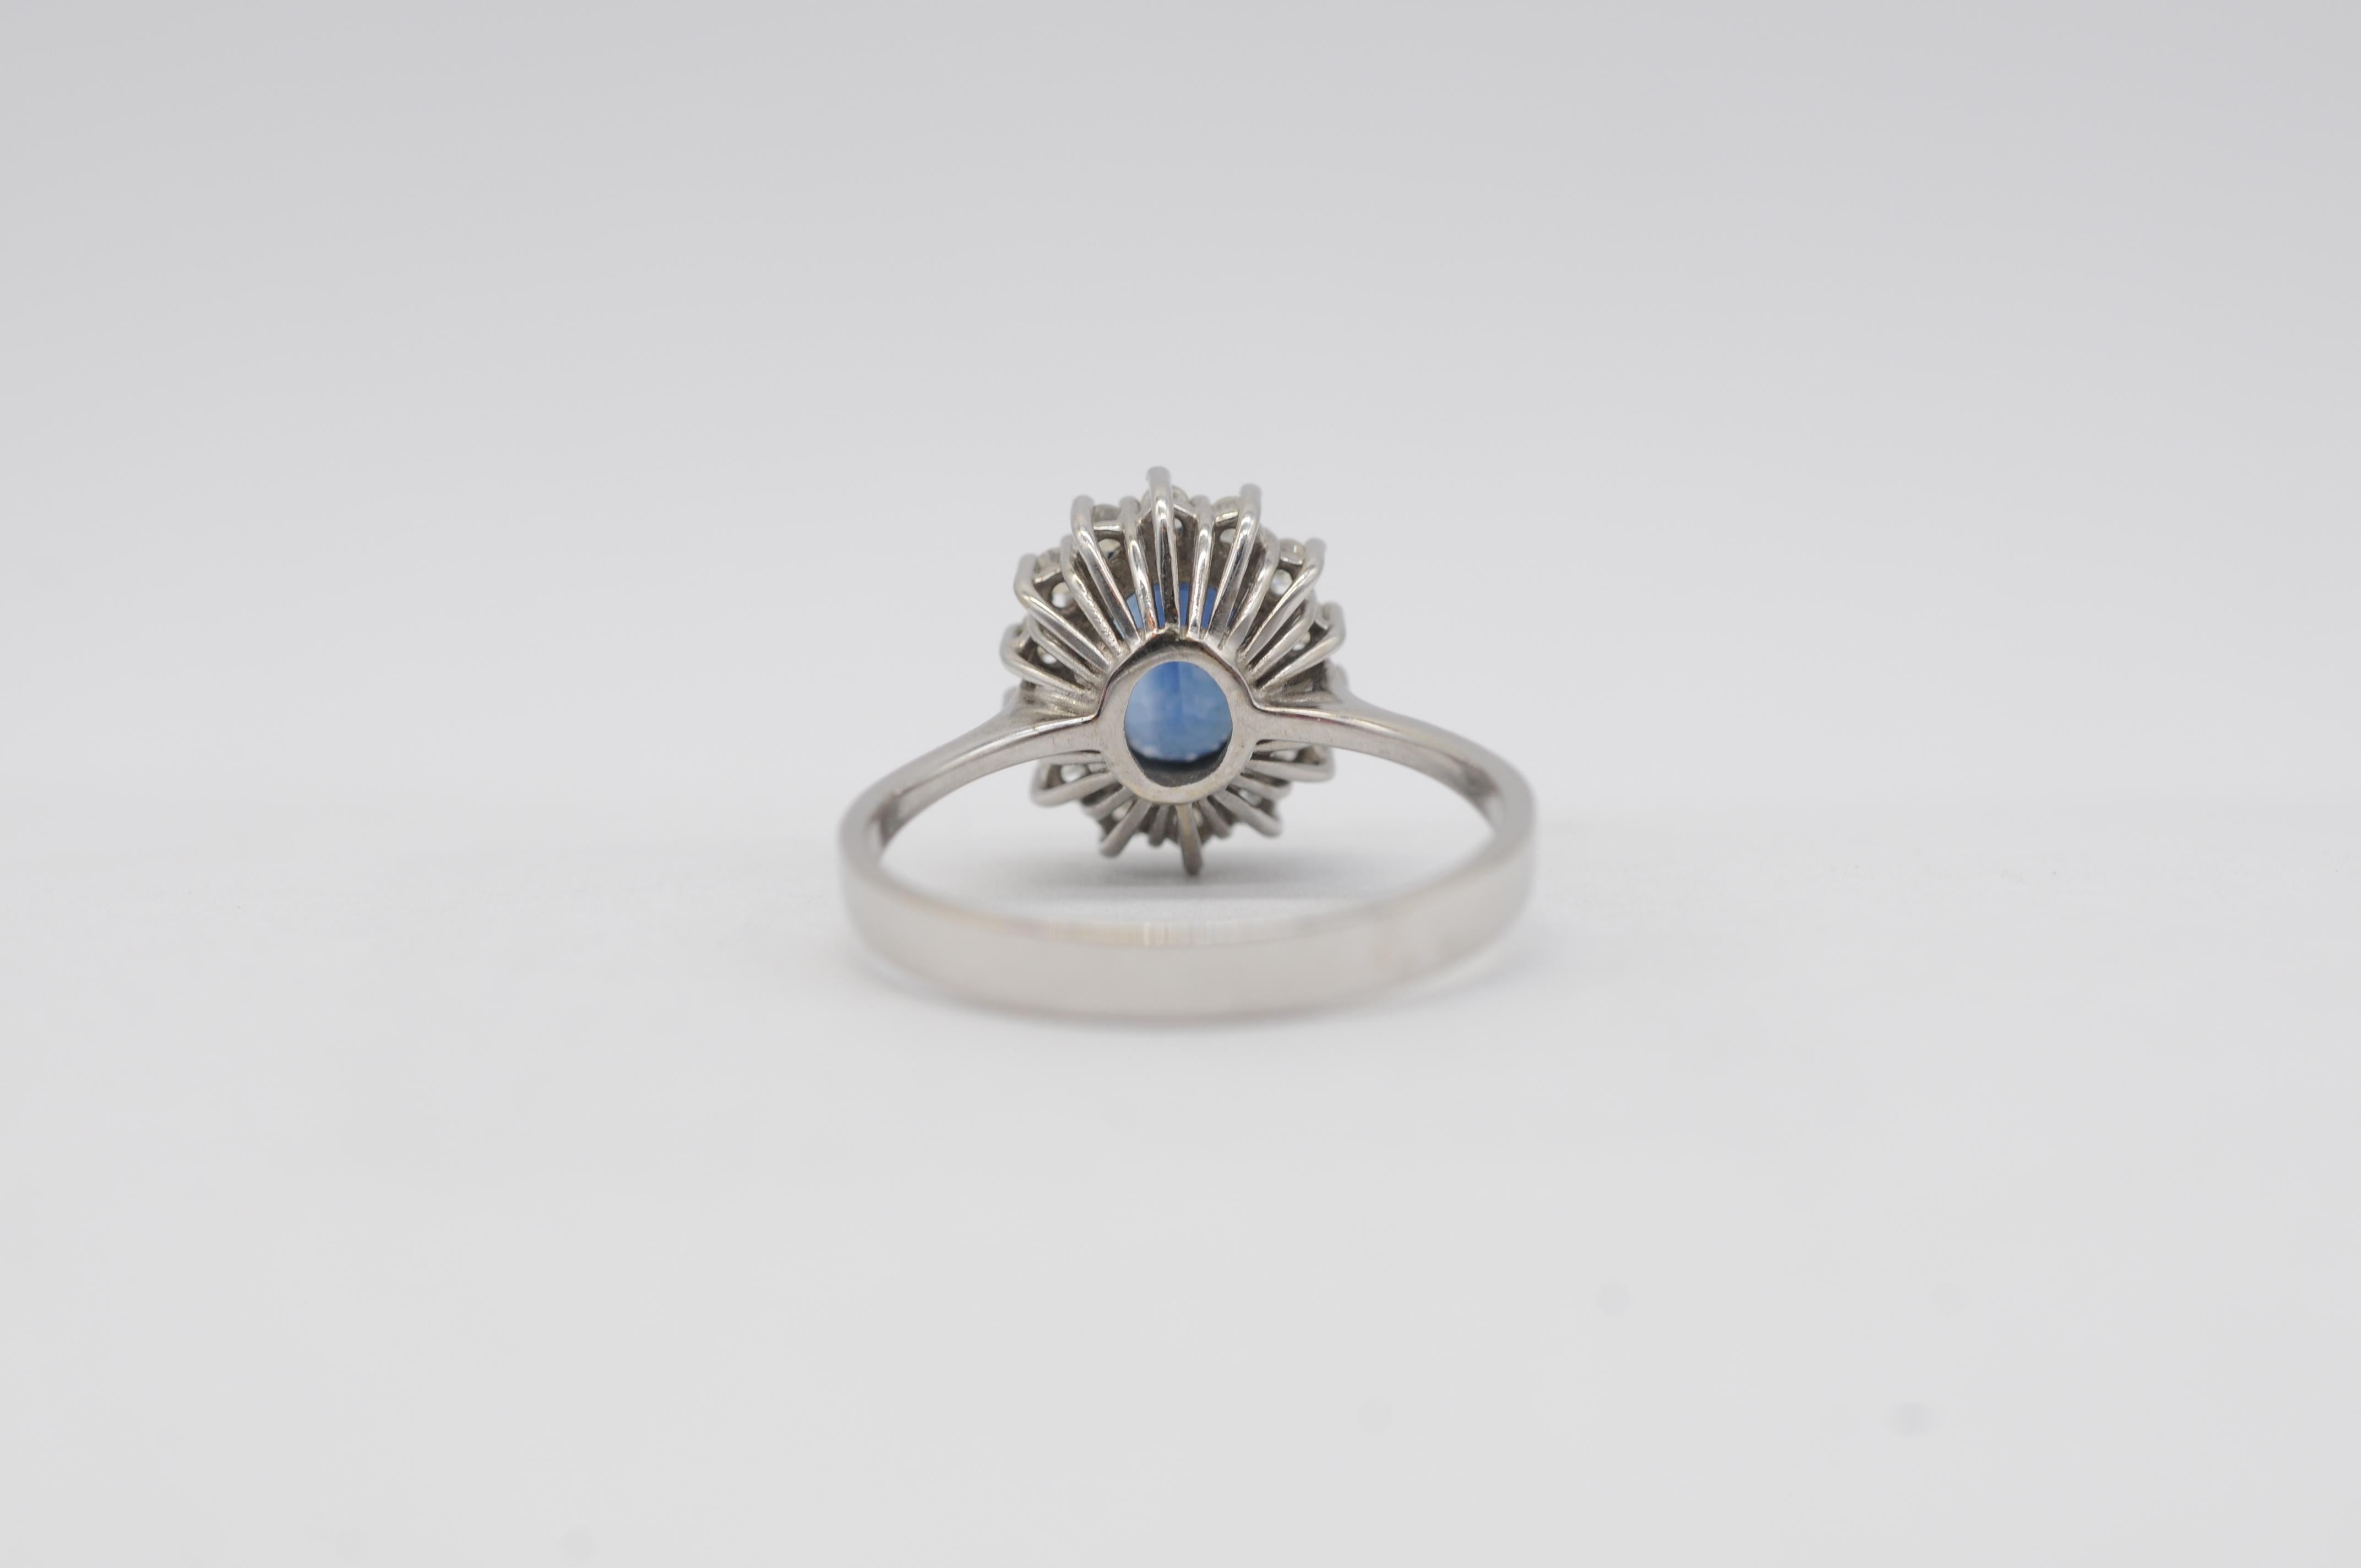 Exquisite gold ring with sapphire and diamonds, like Lady Diana's engagement For Sale 1